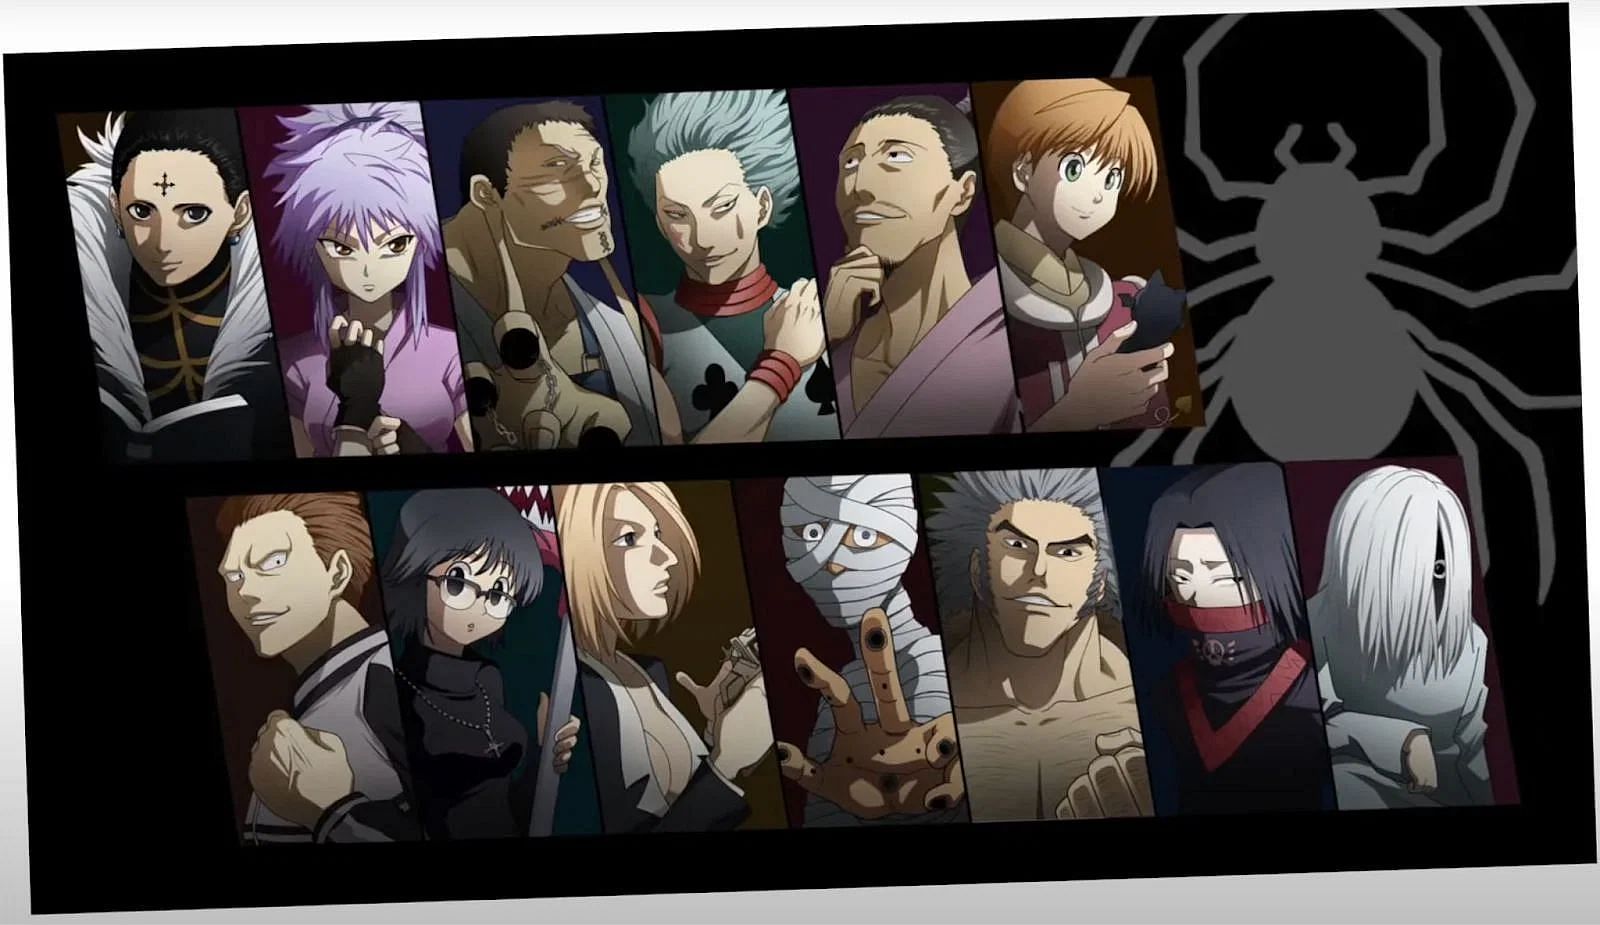 When did Phantom Troupe formed?